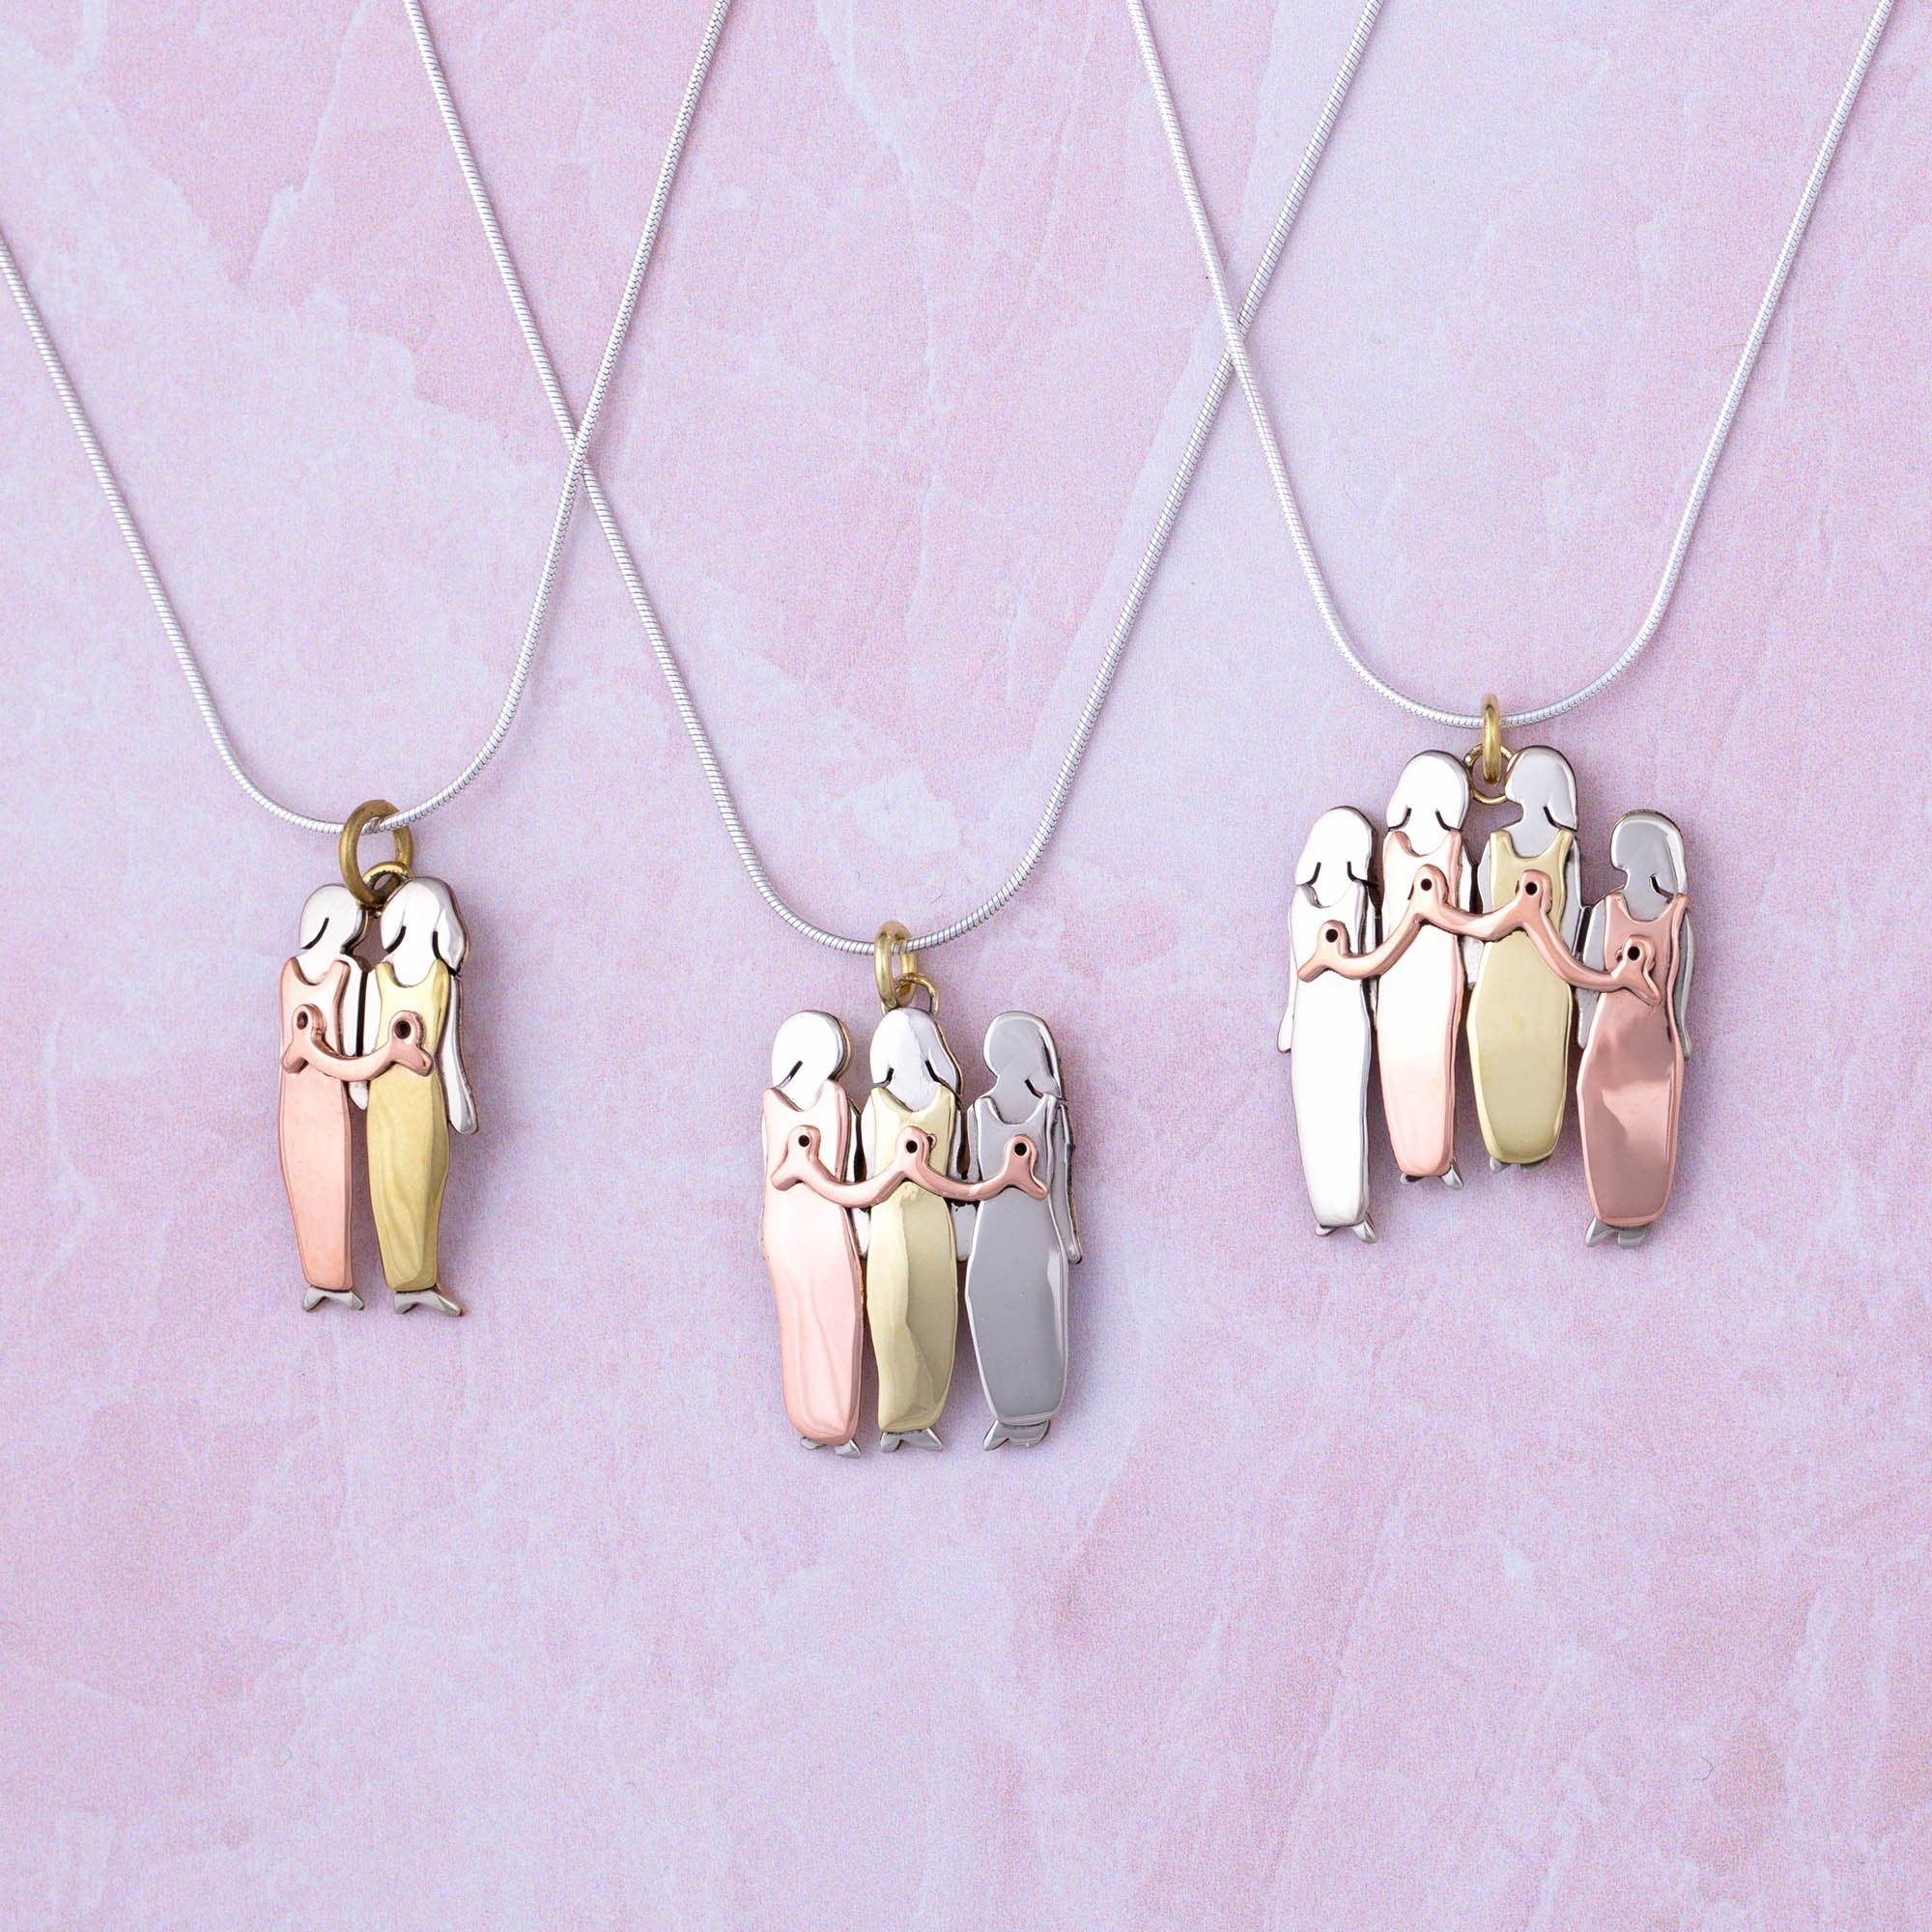 Fighting Together Breast Cancer Necklace - 4 Sisters - Pendant Only